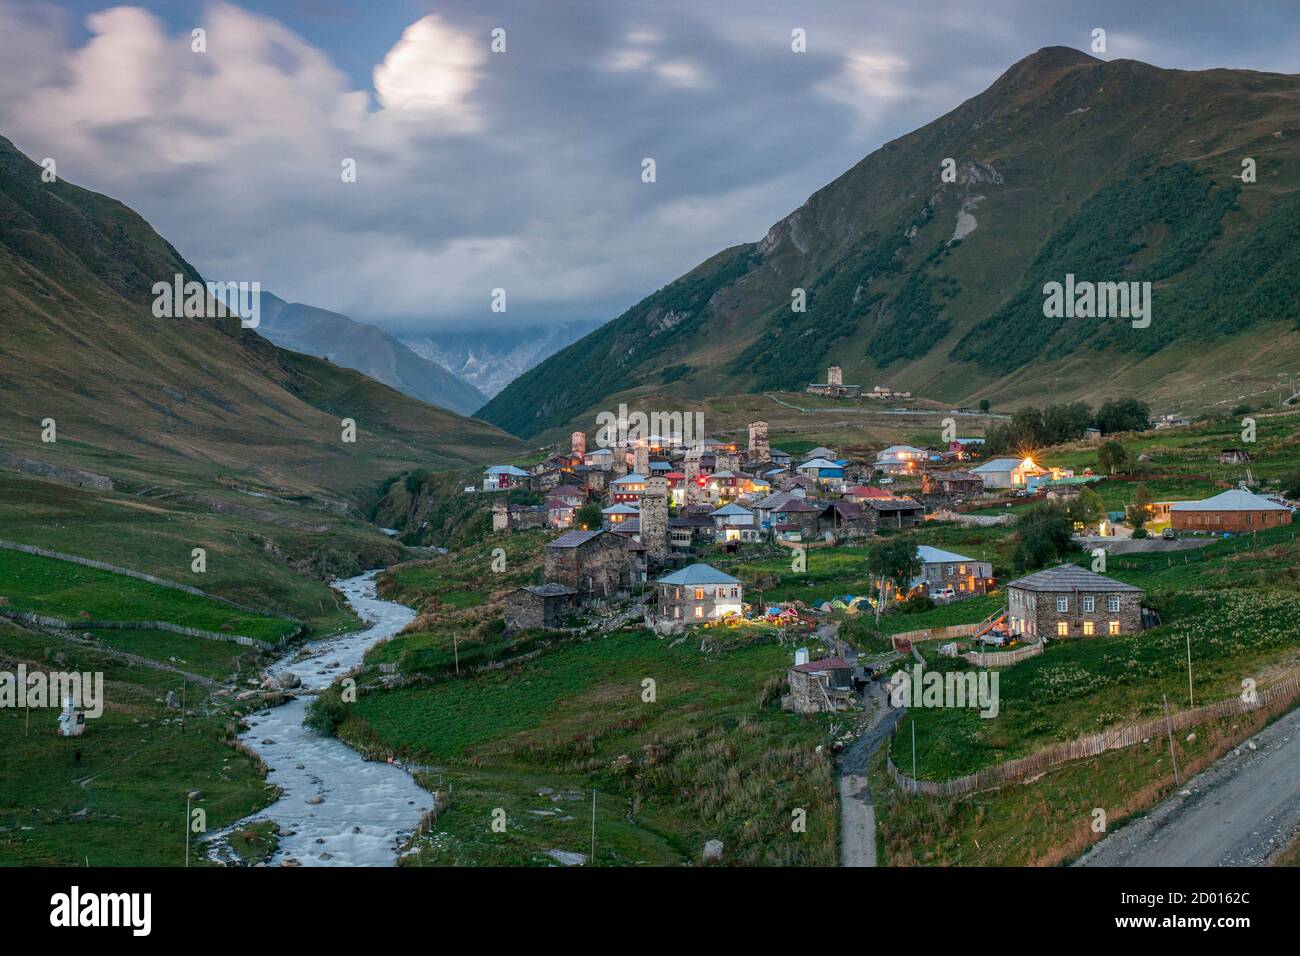 Dusk view of Zhibiani and Chvibiani, two of the four hamlets comprising Ushguli community in Svaneti district, Caucasus Mountains, northern Georgia. Stock Photo